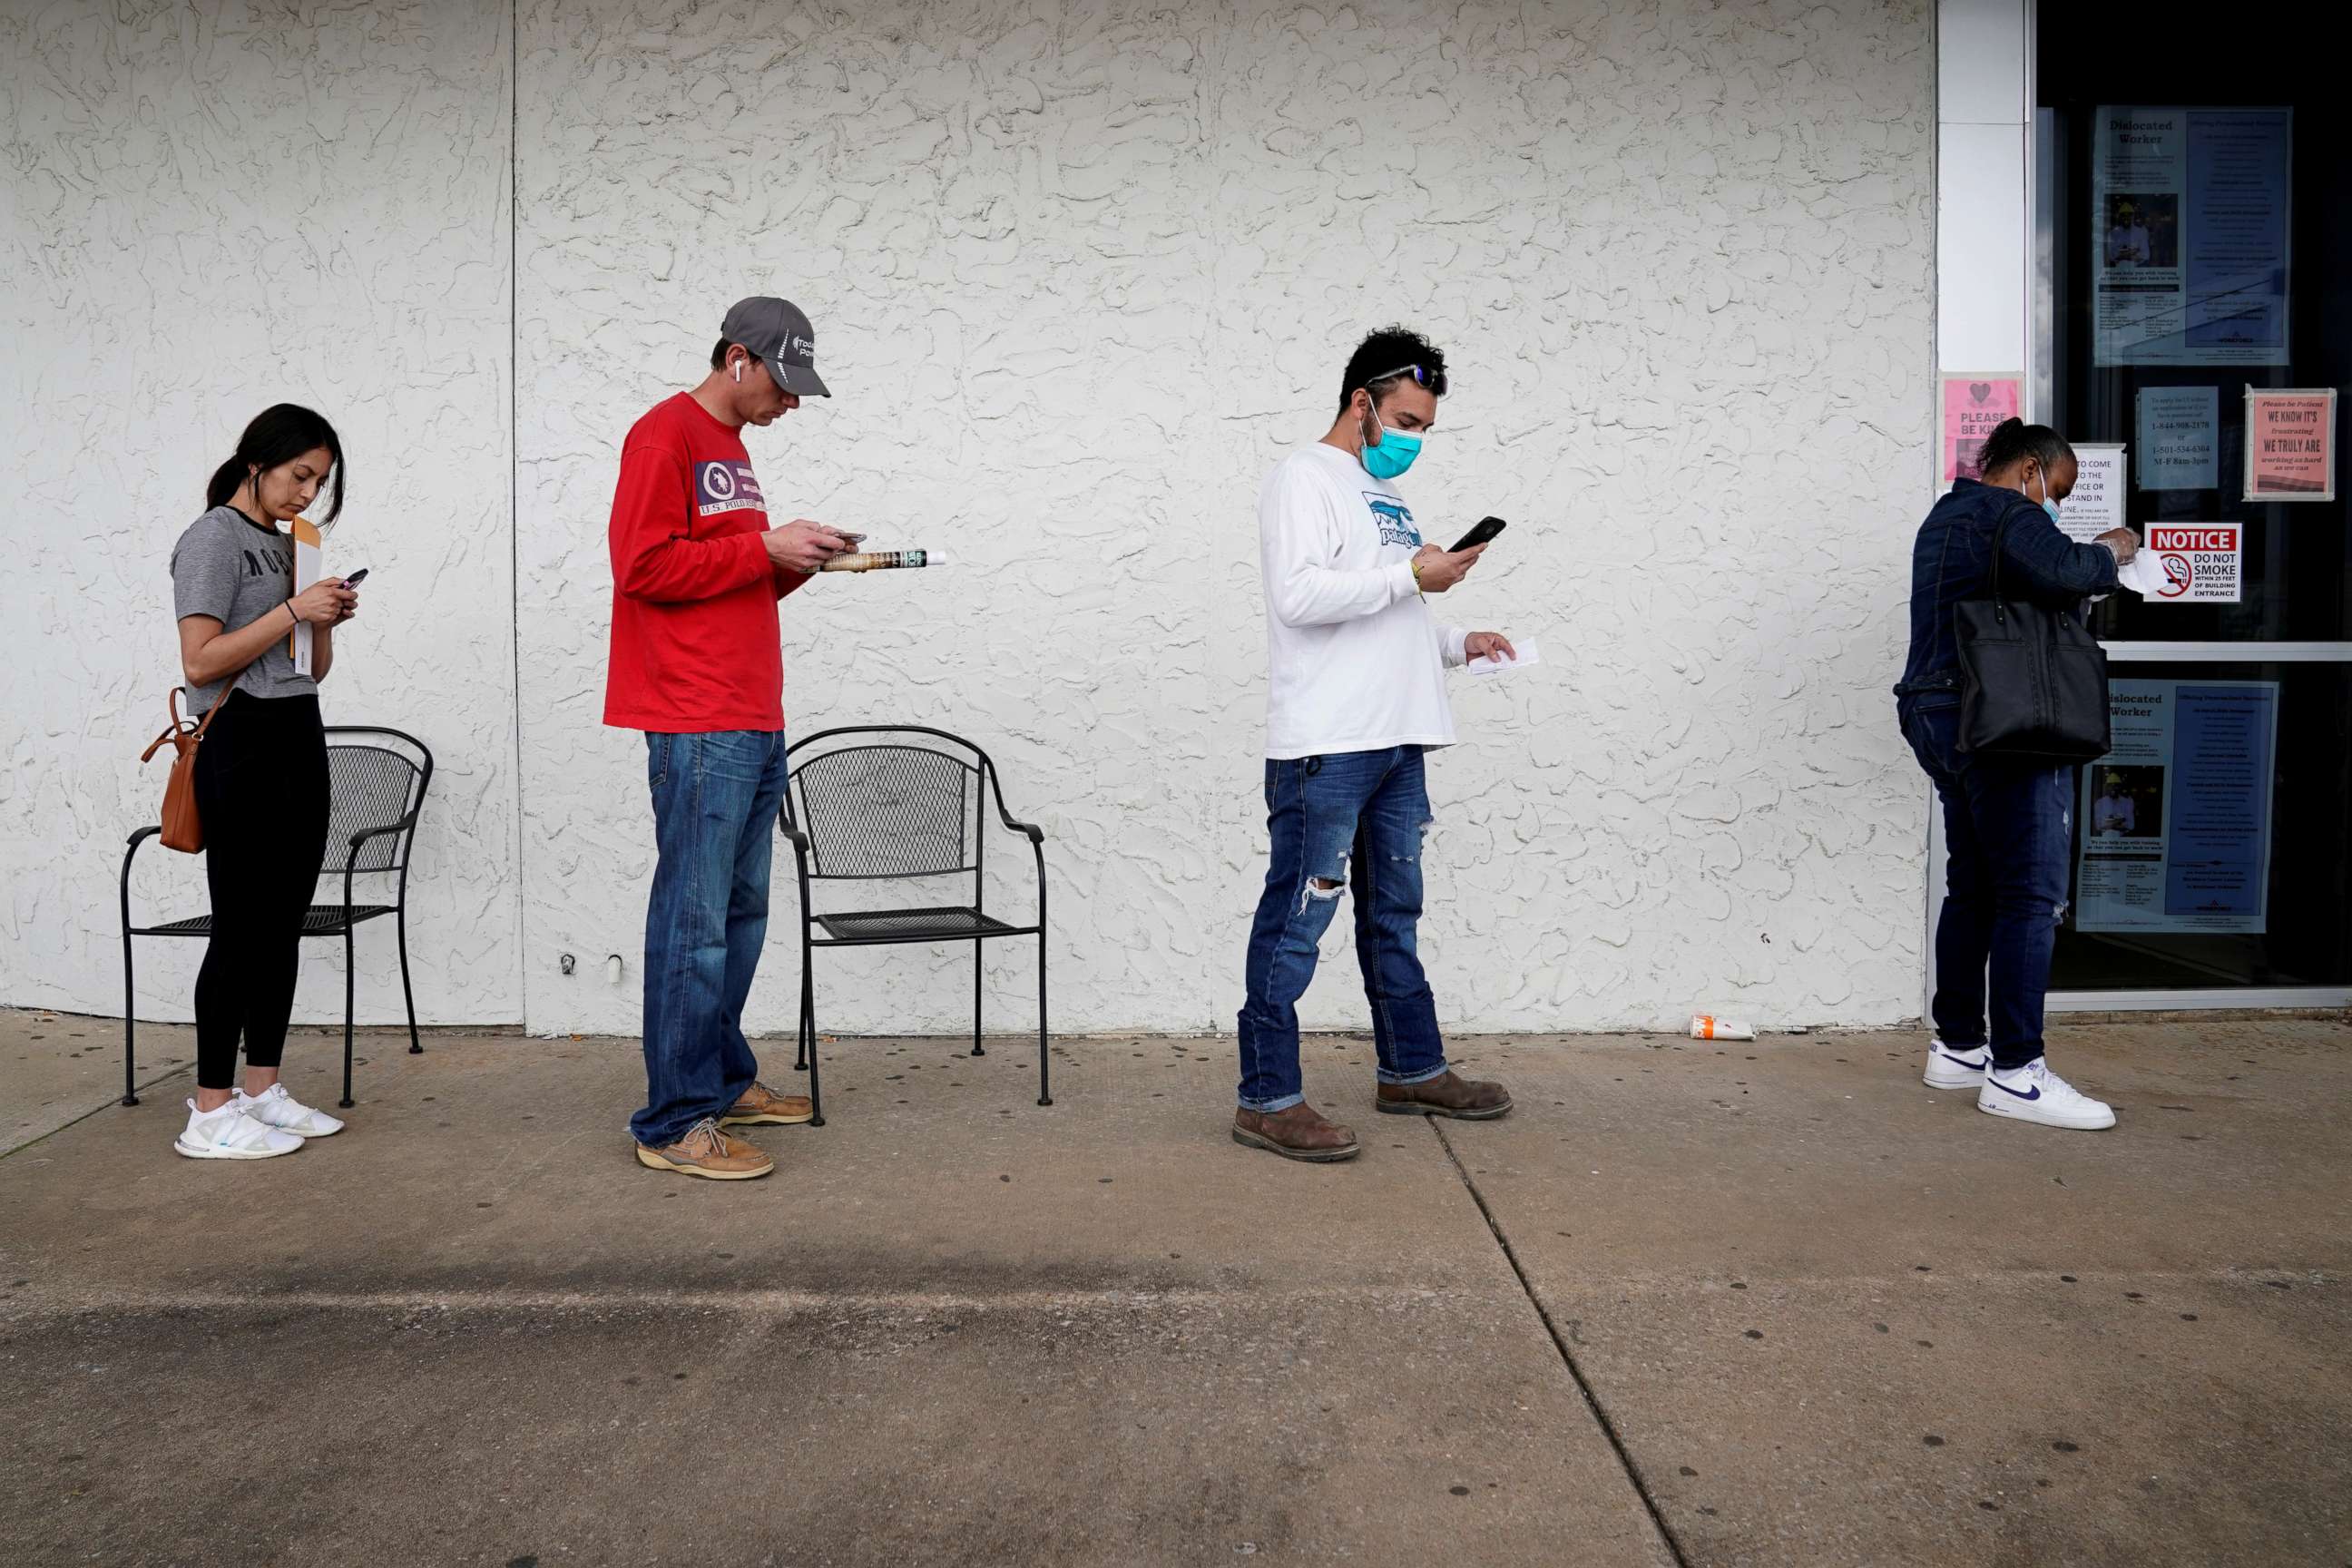 PHOTO: People who lost their jobs wait in line to file for unemployment following an outbreak of the coronavirus disease (COVID-19), at an Arkansas Workforce Center in Fayetteville, Arkansas, April 6, 2020.